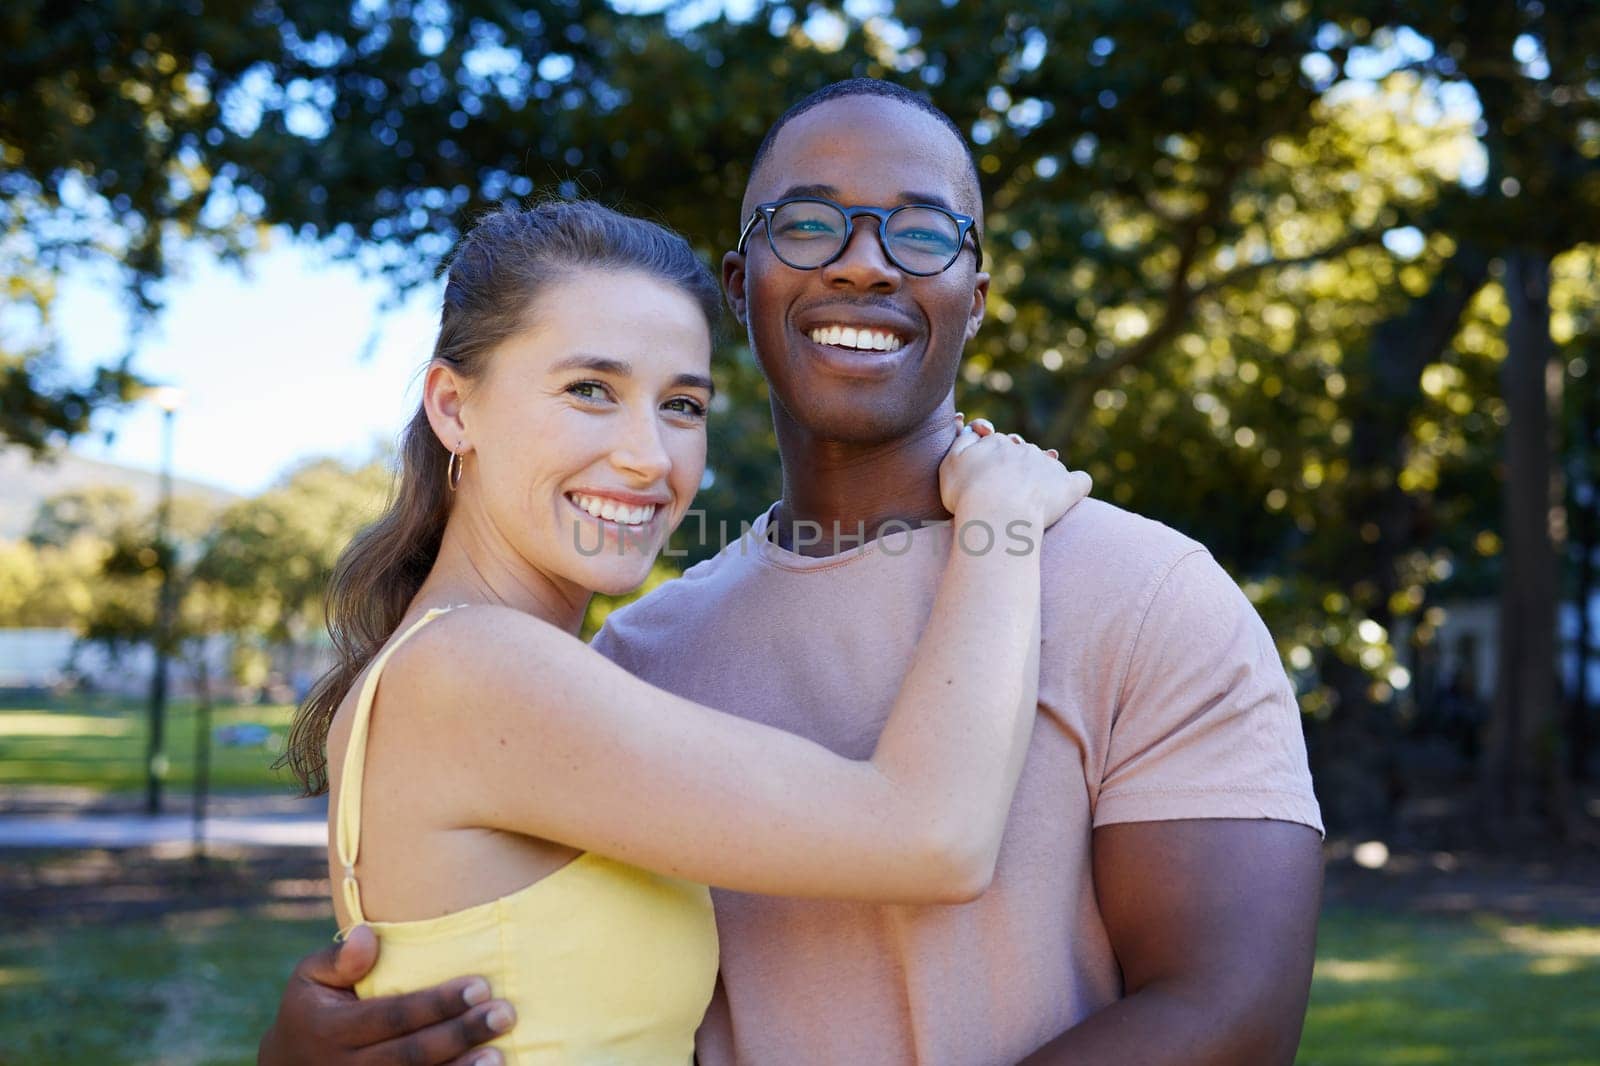 Interracial, portrait and couple hug, park or smile for relationship, romance or bonding. Love, black man or woman romantic in nature, loving or happiness with embrace, dating or quality time outdoor.